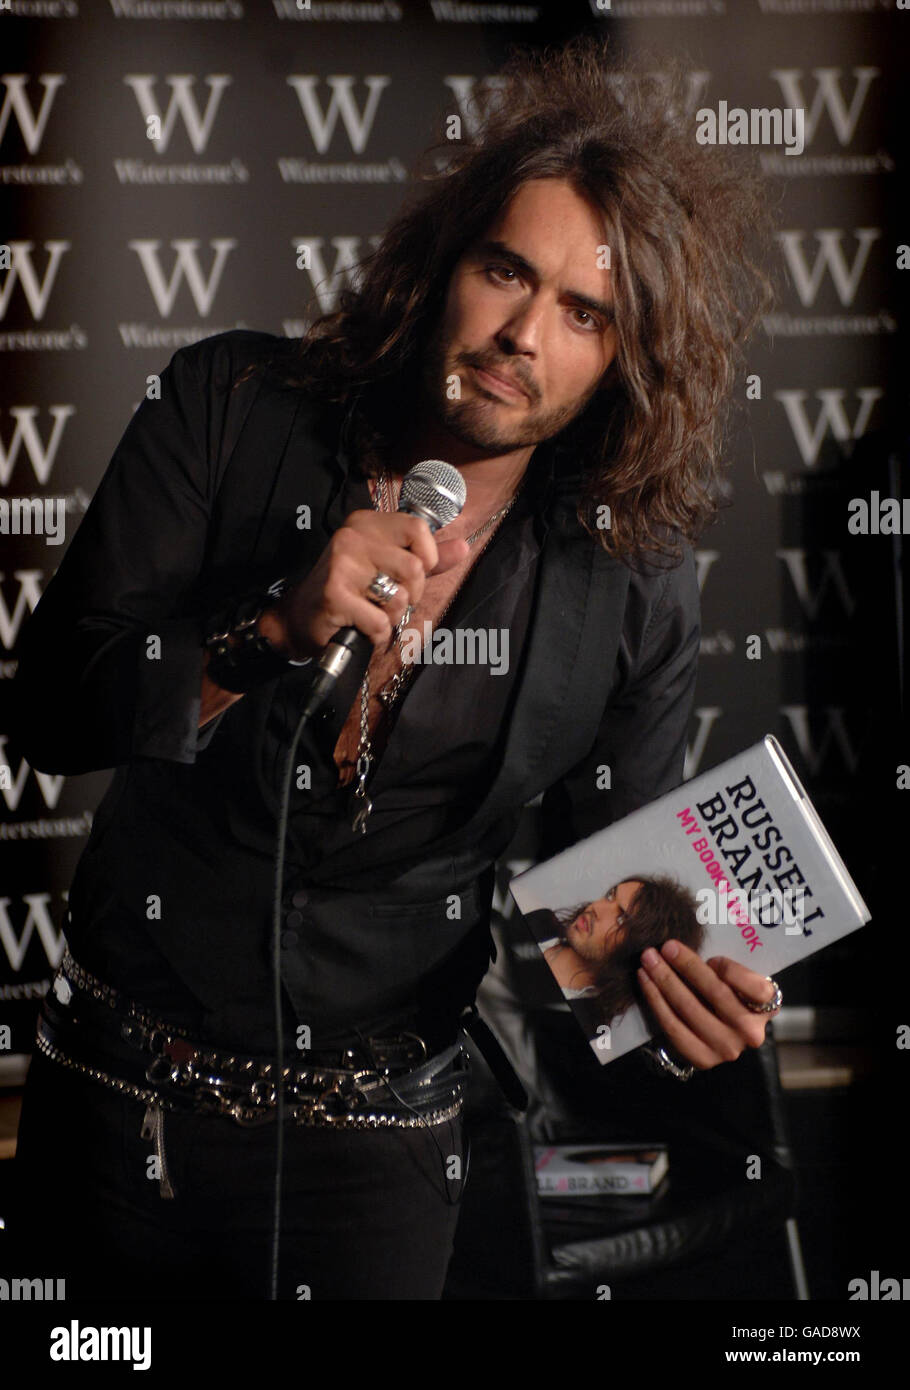 Russell Brand My Booky Wook Signing - London. Russell Brand signiert Kopien seines Buches My Booky Wook bei Waterstone's, Piccadilly, London. Stockfoto